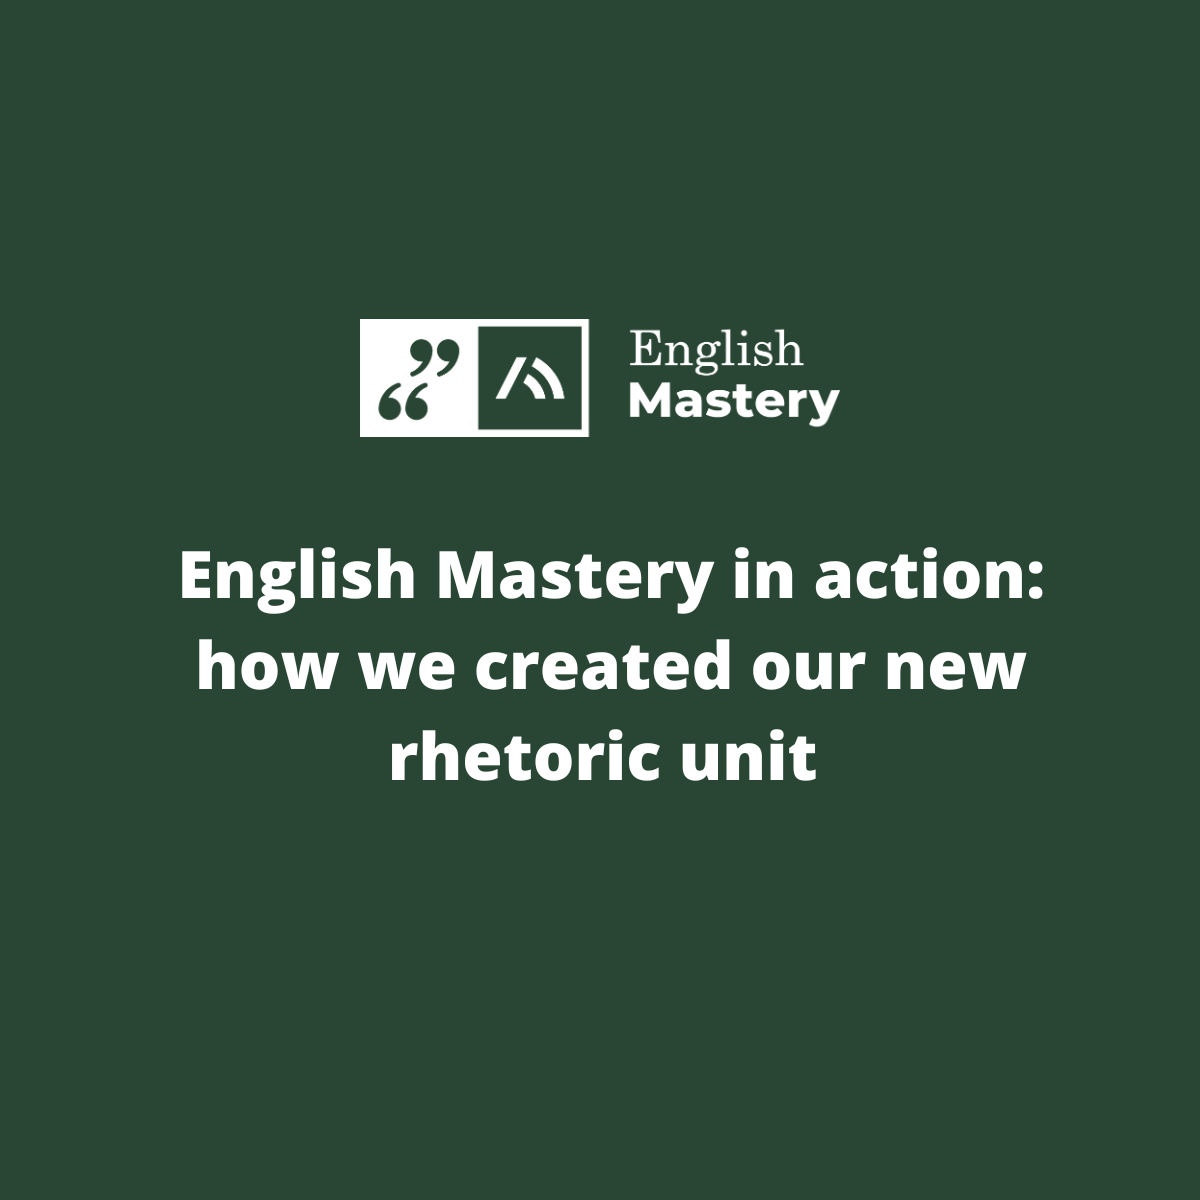 English Mastery in action: how we created our new rhetoric unit